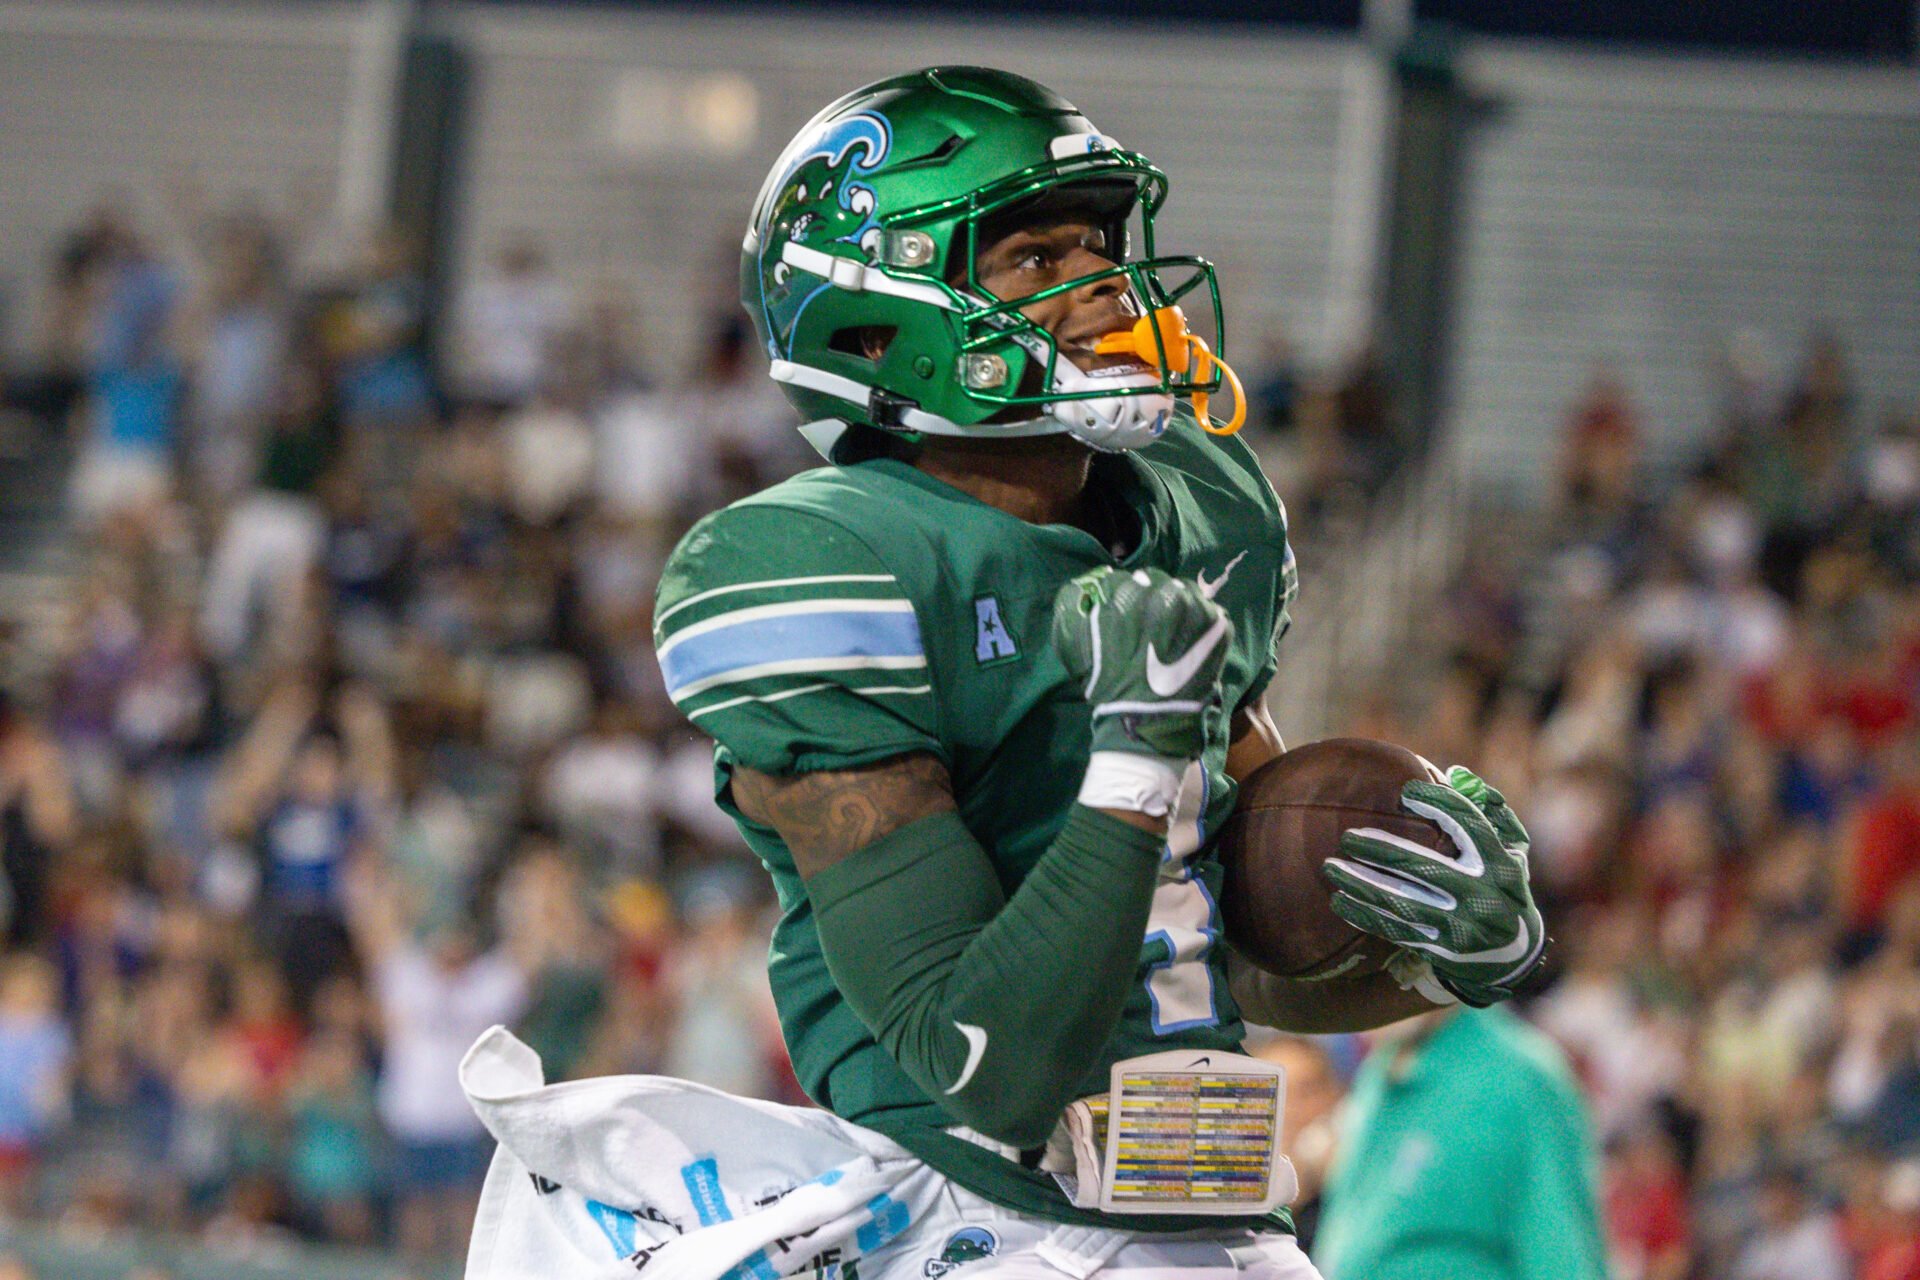 Tulane Green Wave wide receiver Jha'Quan Jackson (4) reacts to scoring a touchdown against the South Alabama Jaguars during the first half at Yulman Stadium.